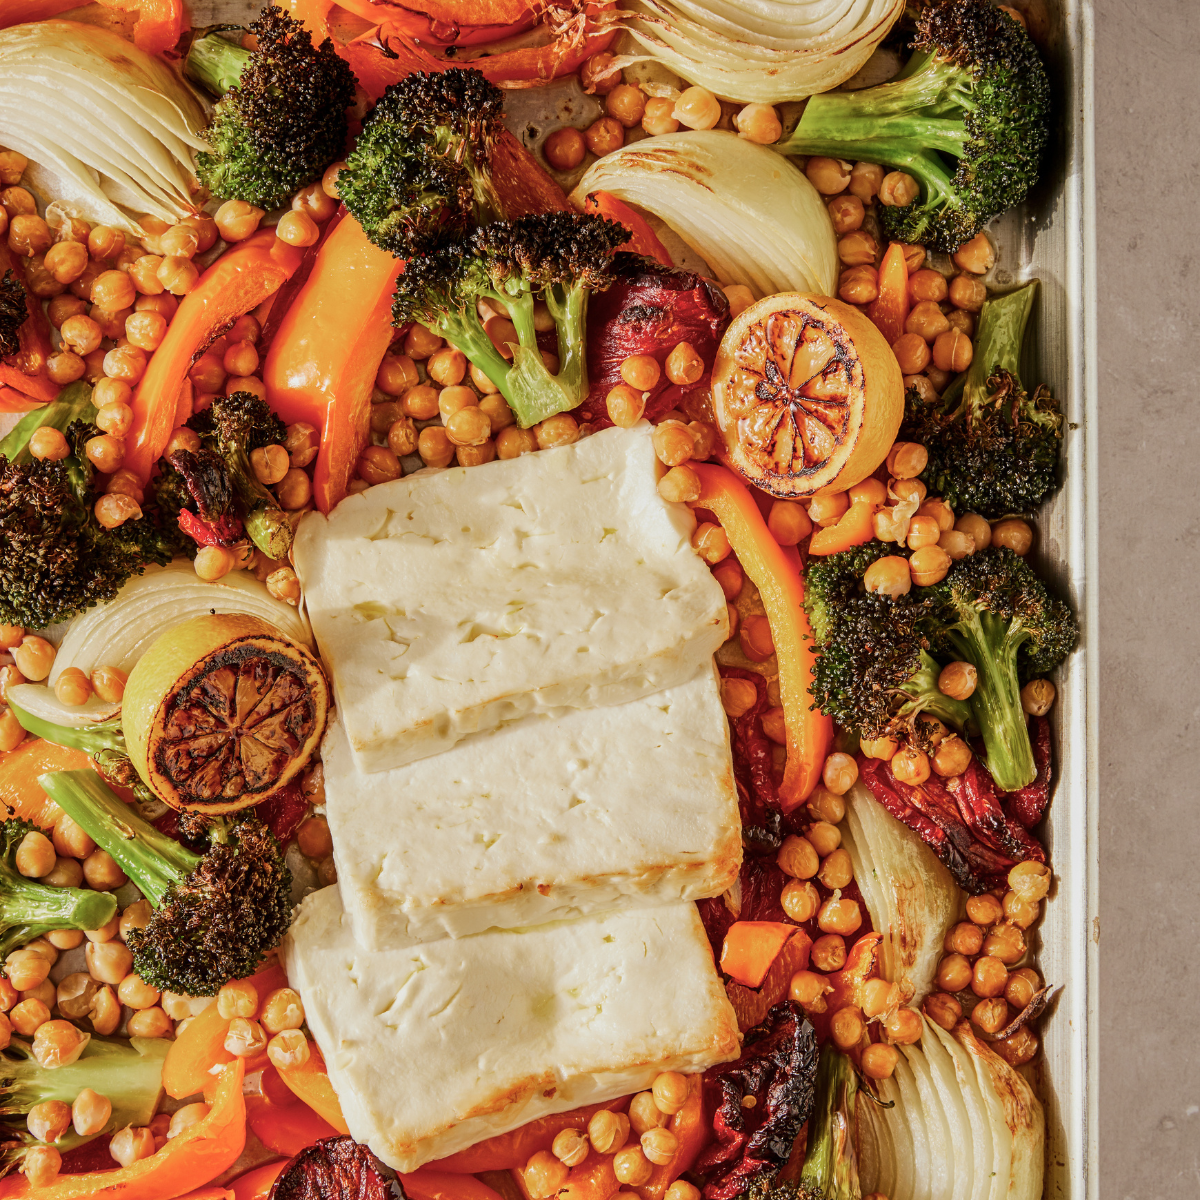 Broccoli Feta Bake with Sun-Dried Tomatoes and Chickpeas